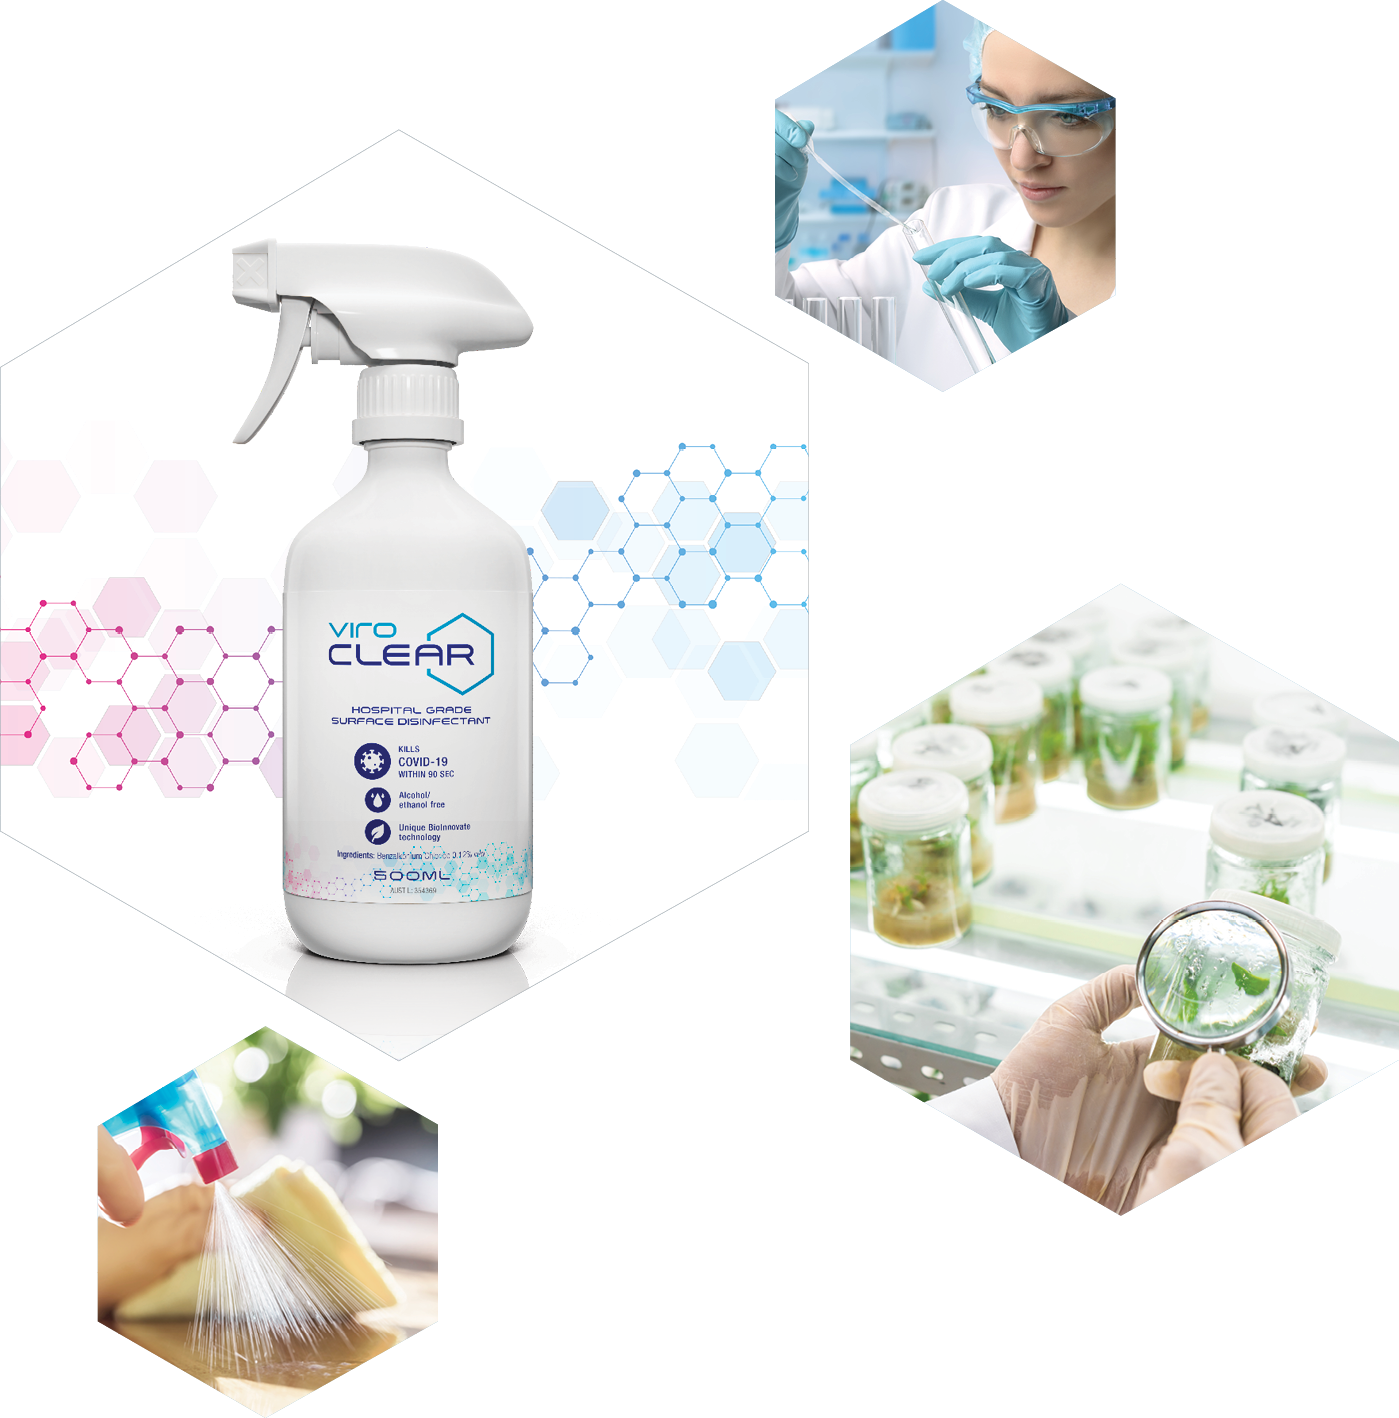 ViroCLEAR Surface Disinfectant